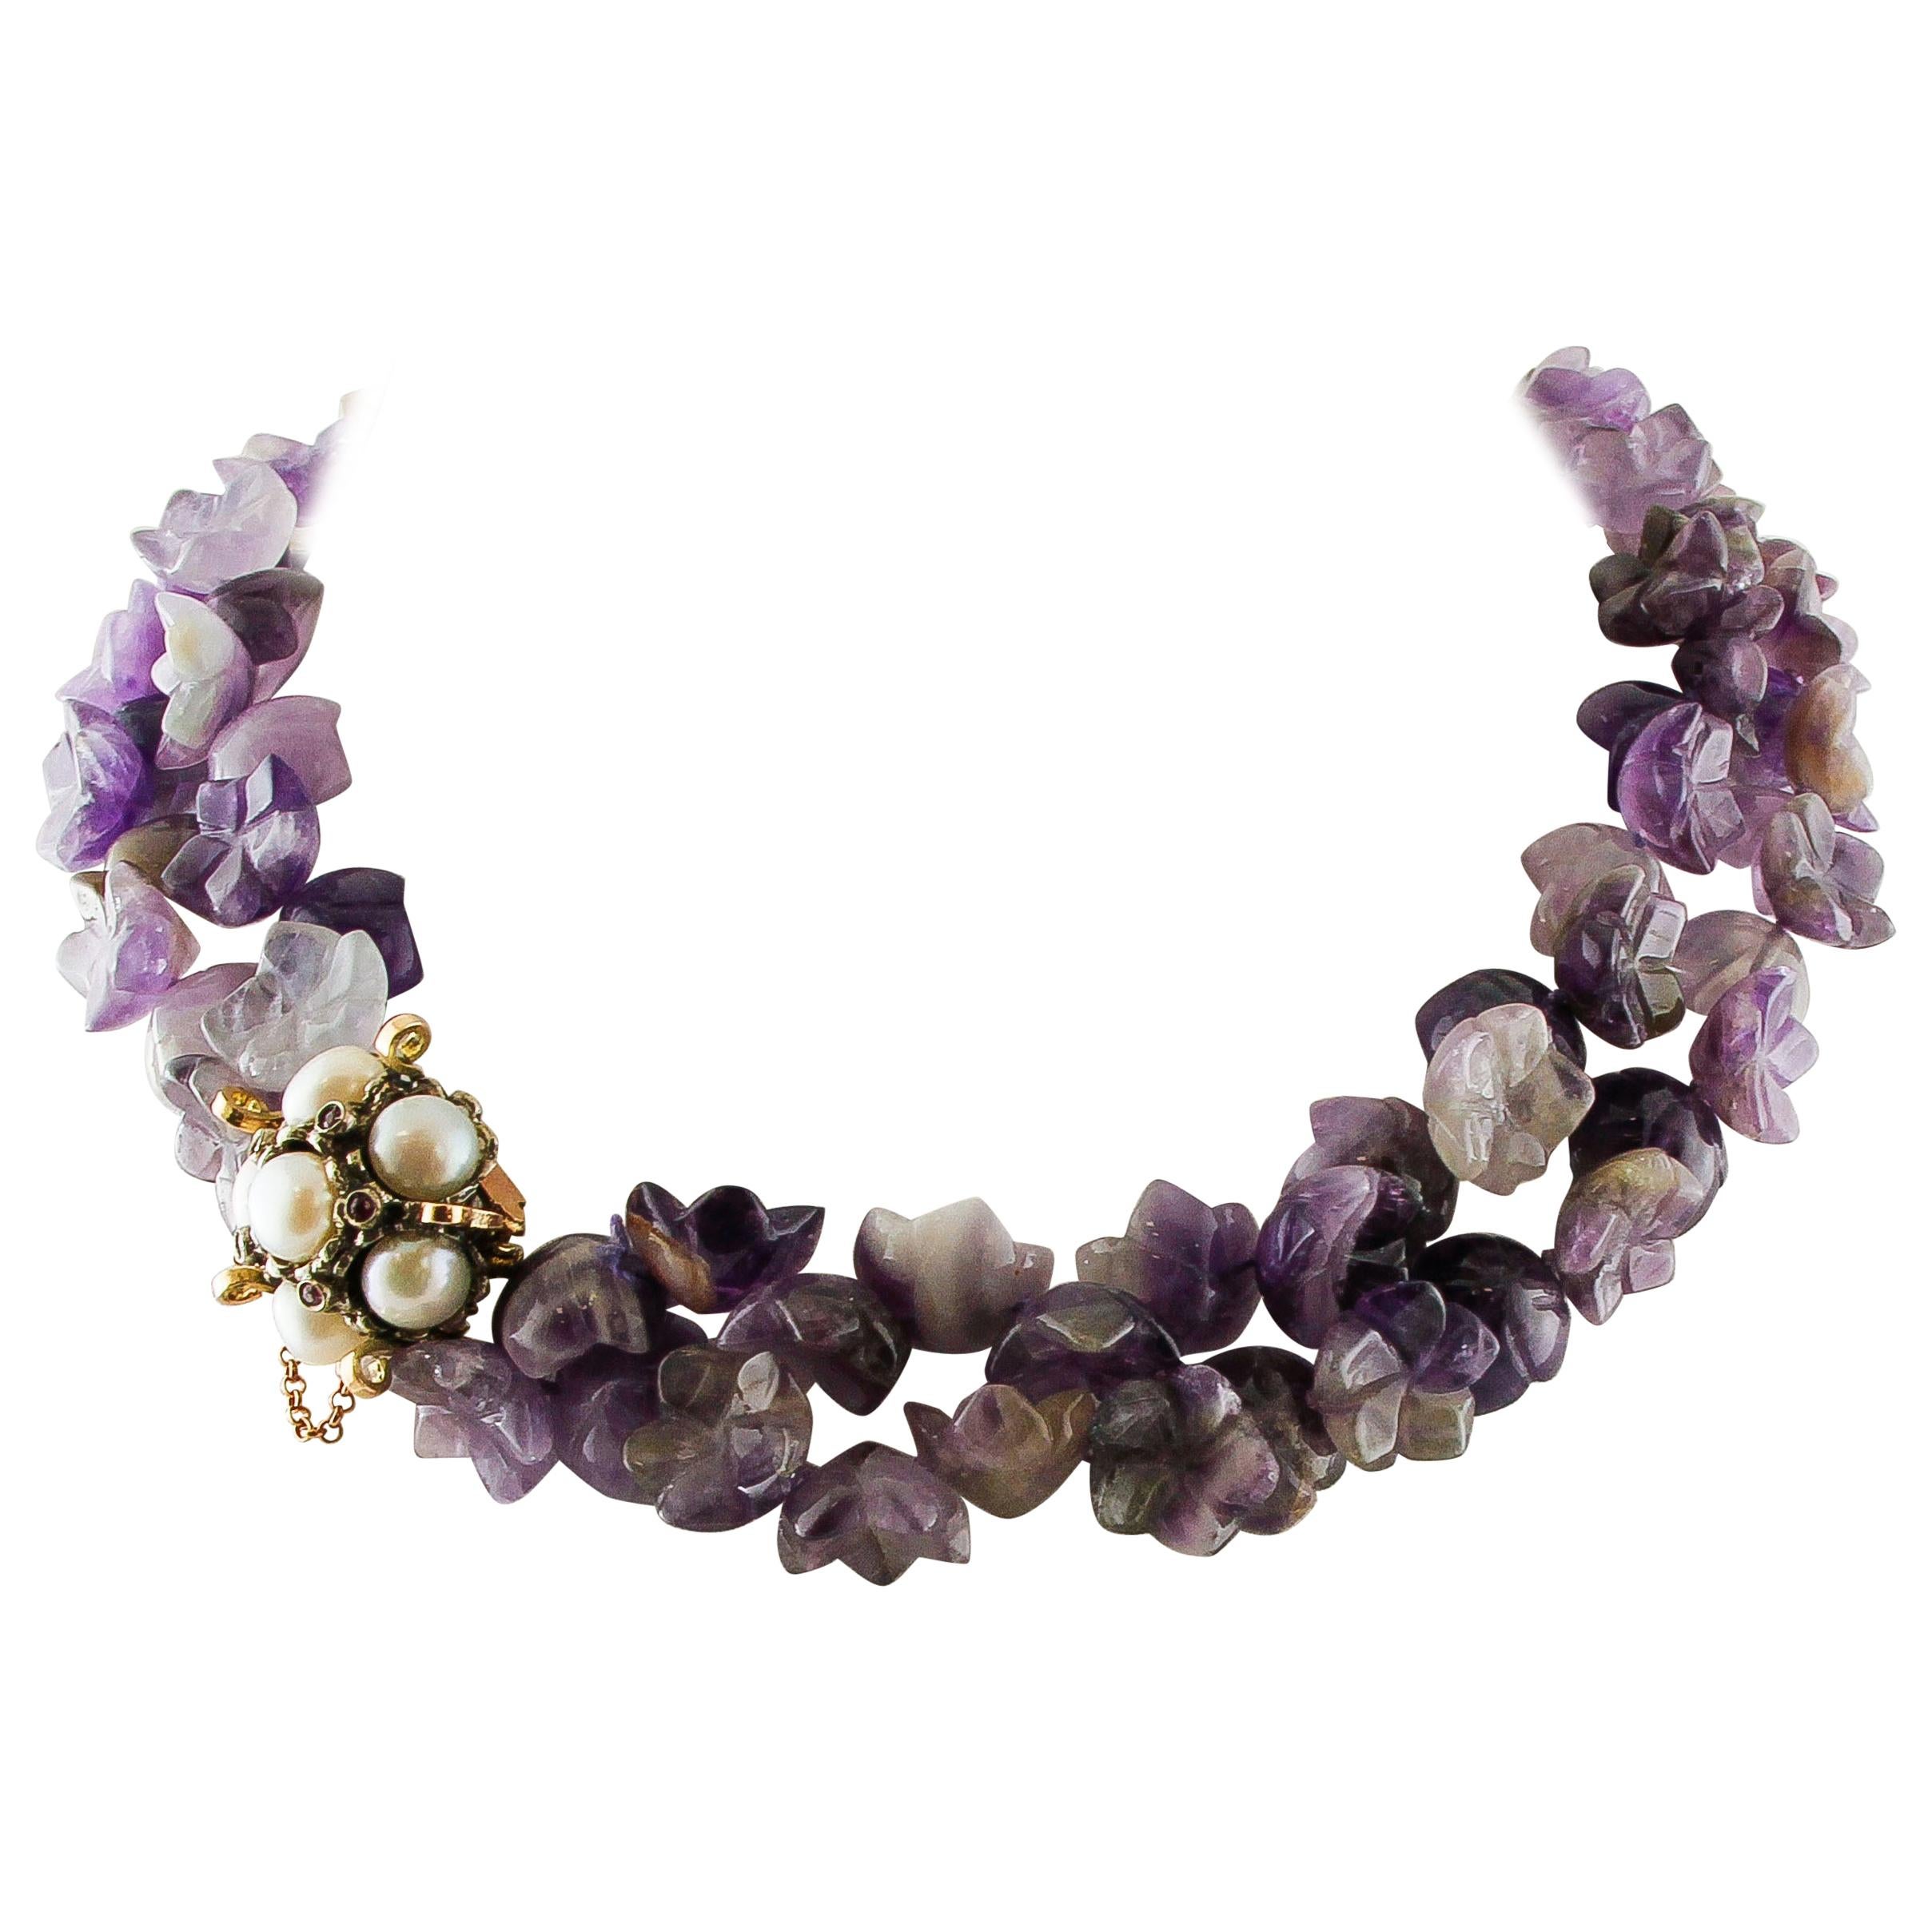 Amethyst Flower Double-Strands Necklace, Pearls, Rubies, Gold and Silver Clasp